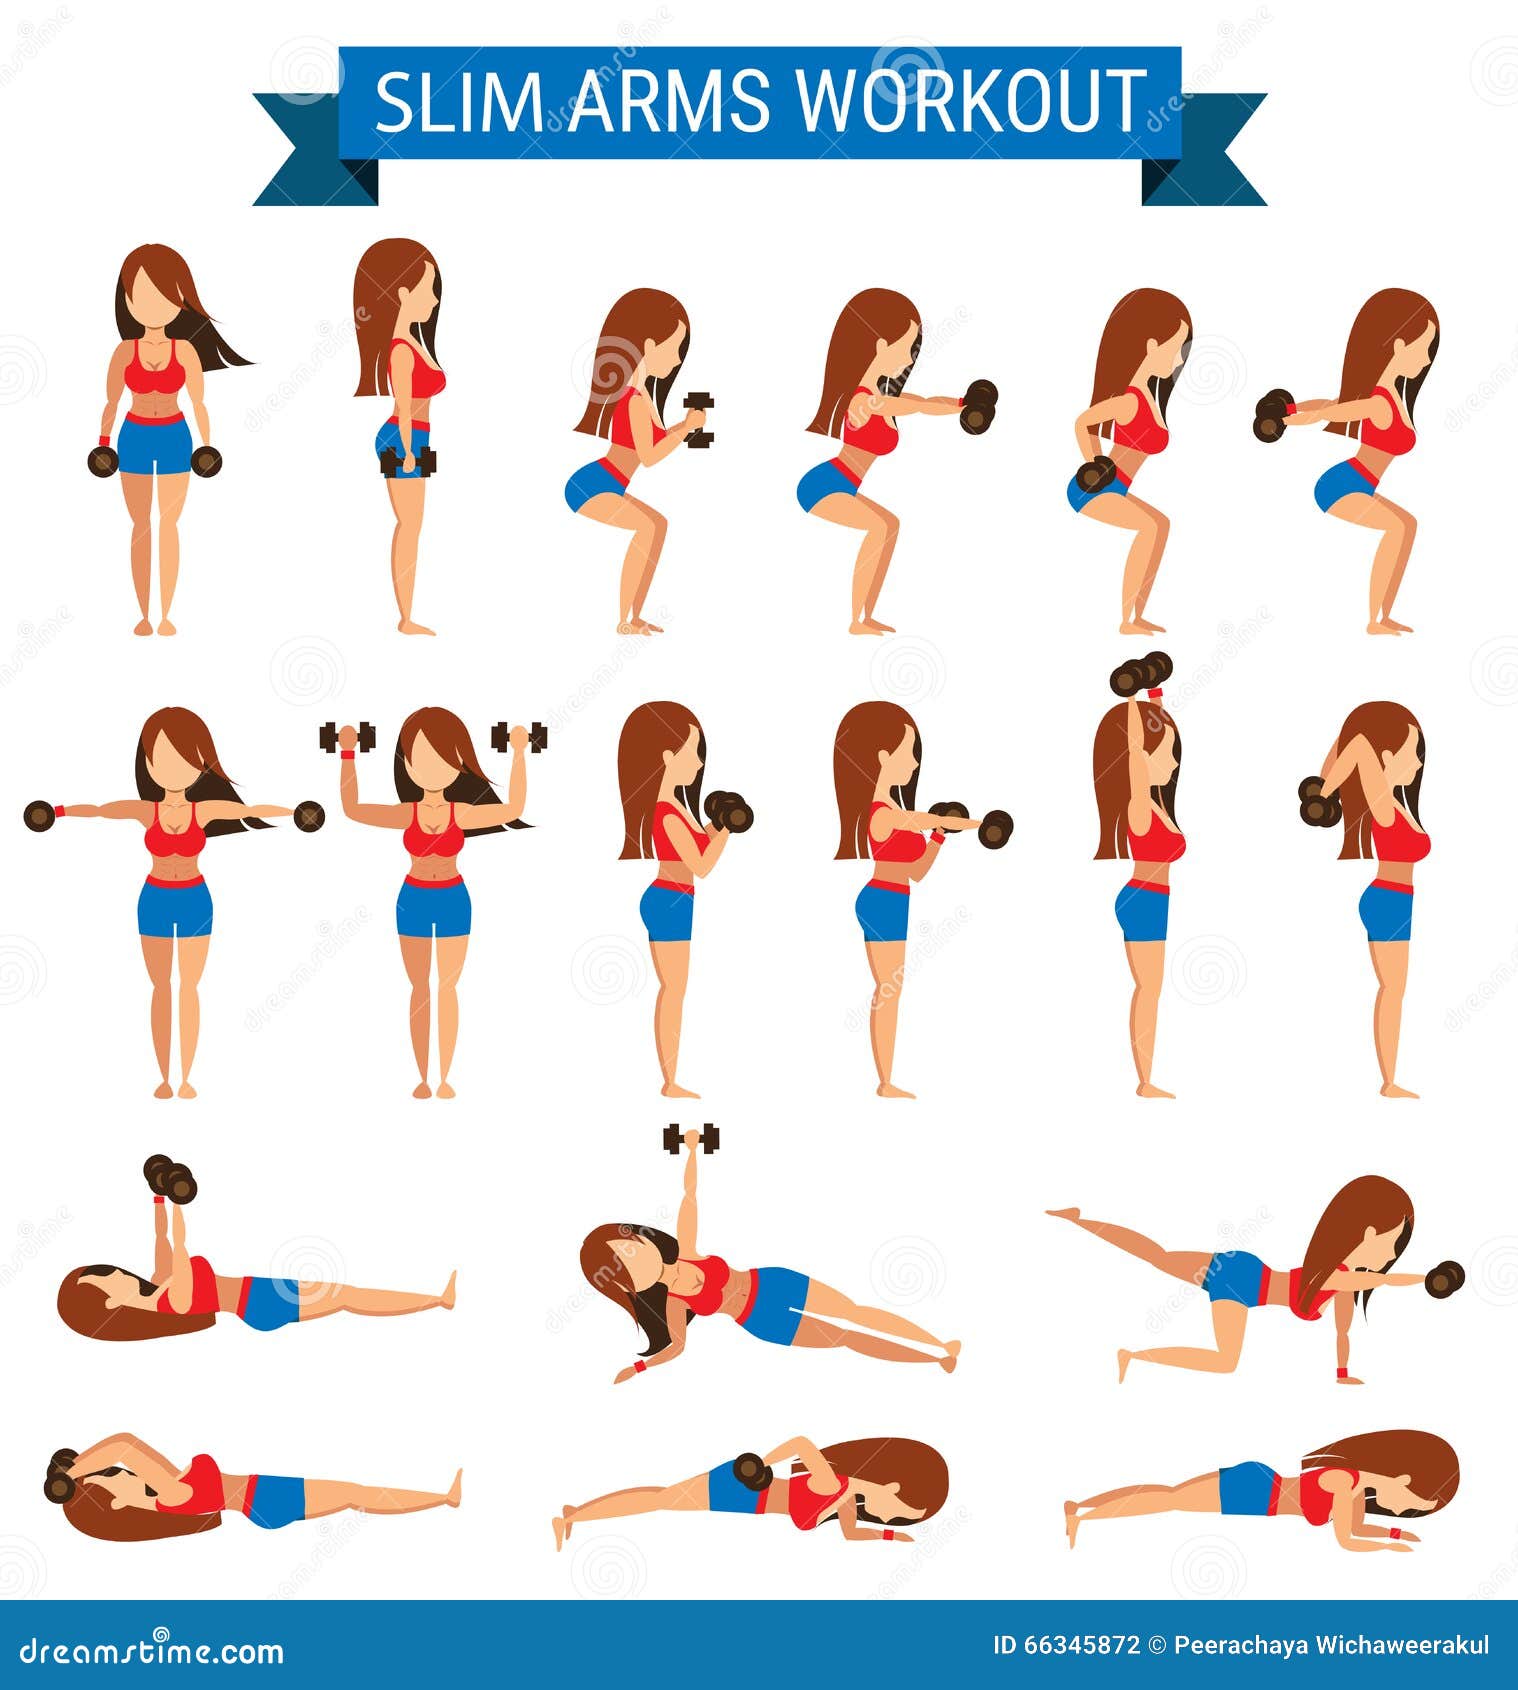 Set of Cardio Exercise for Slim Arms Workout or Weight Training